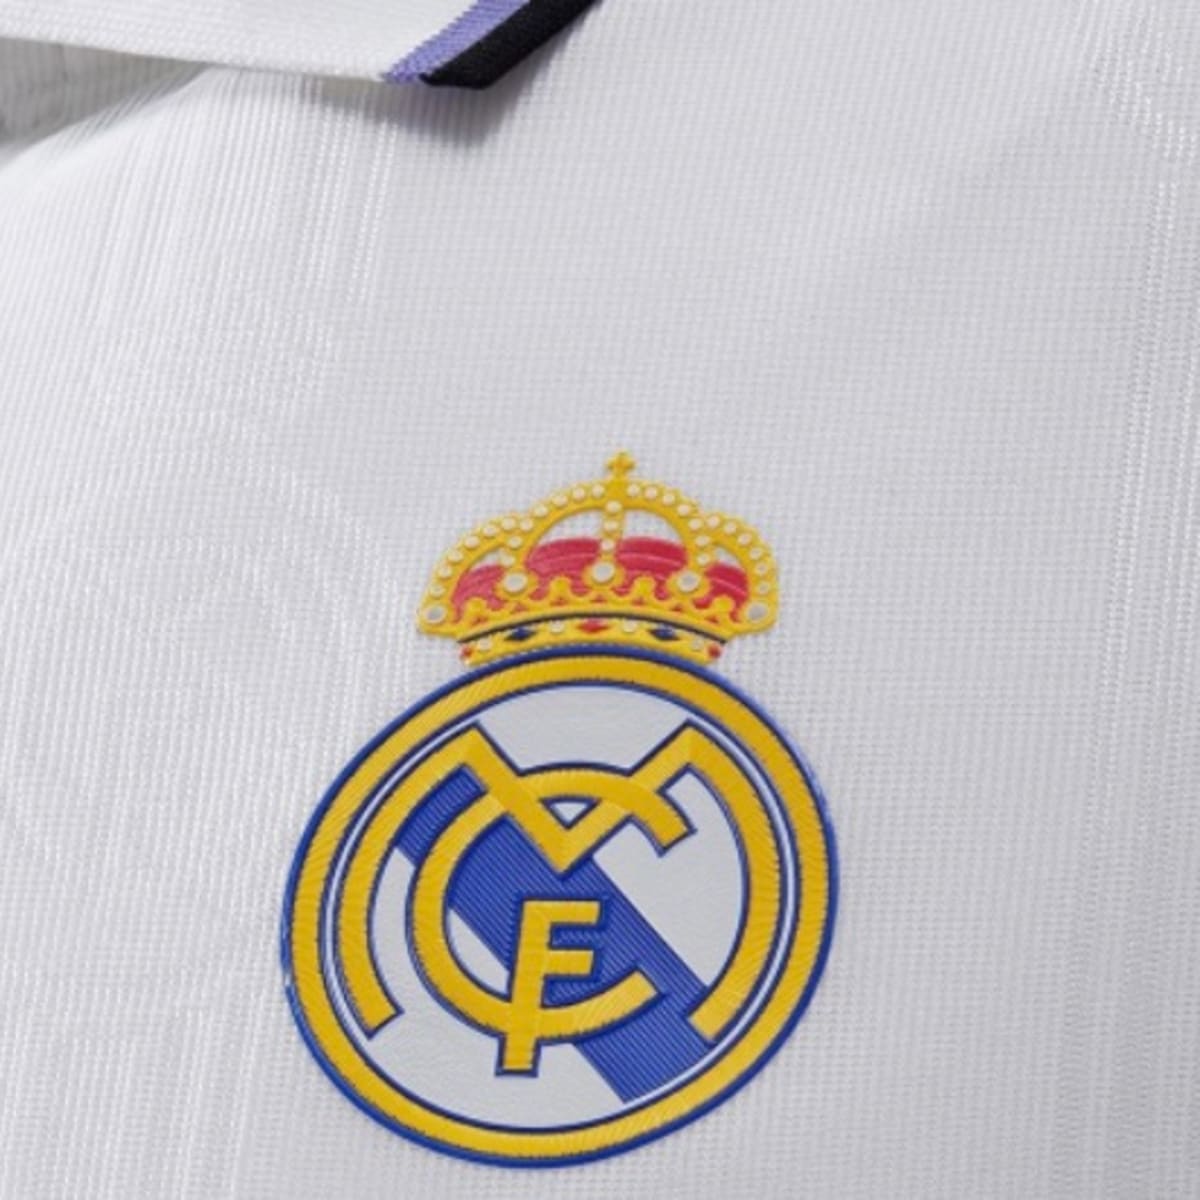 The new jersey for the 2022-23 season, Real Madrid CF